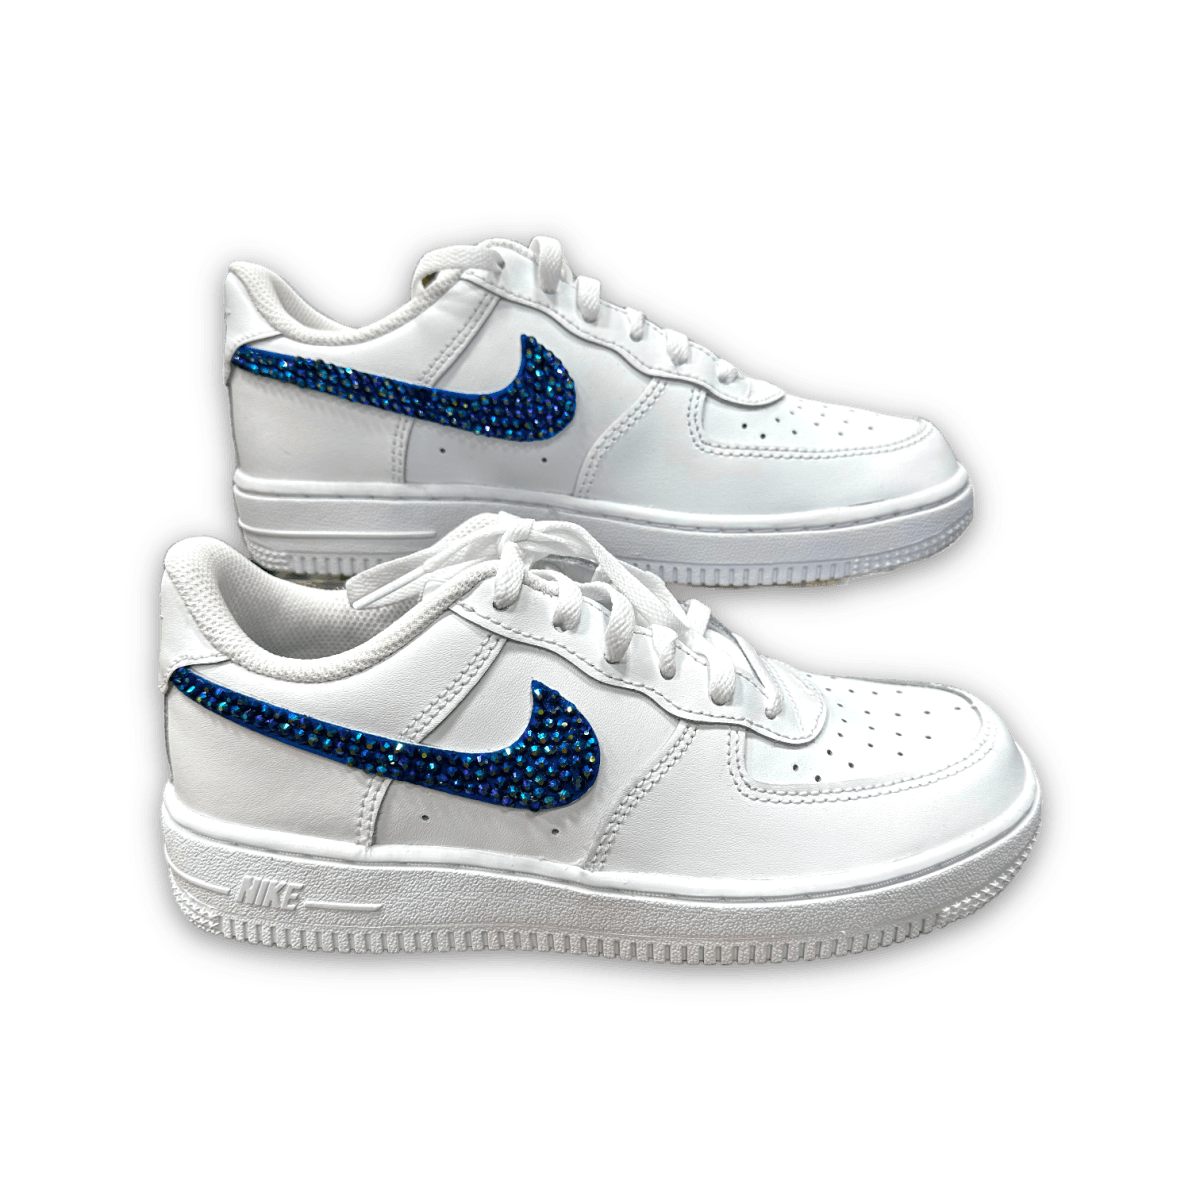 Blingy Jawn Air Force 1 Low '07 White Pre School 3 - Low Sneaker - Nike - Jawns on Fire